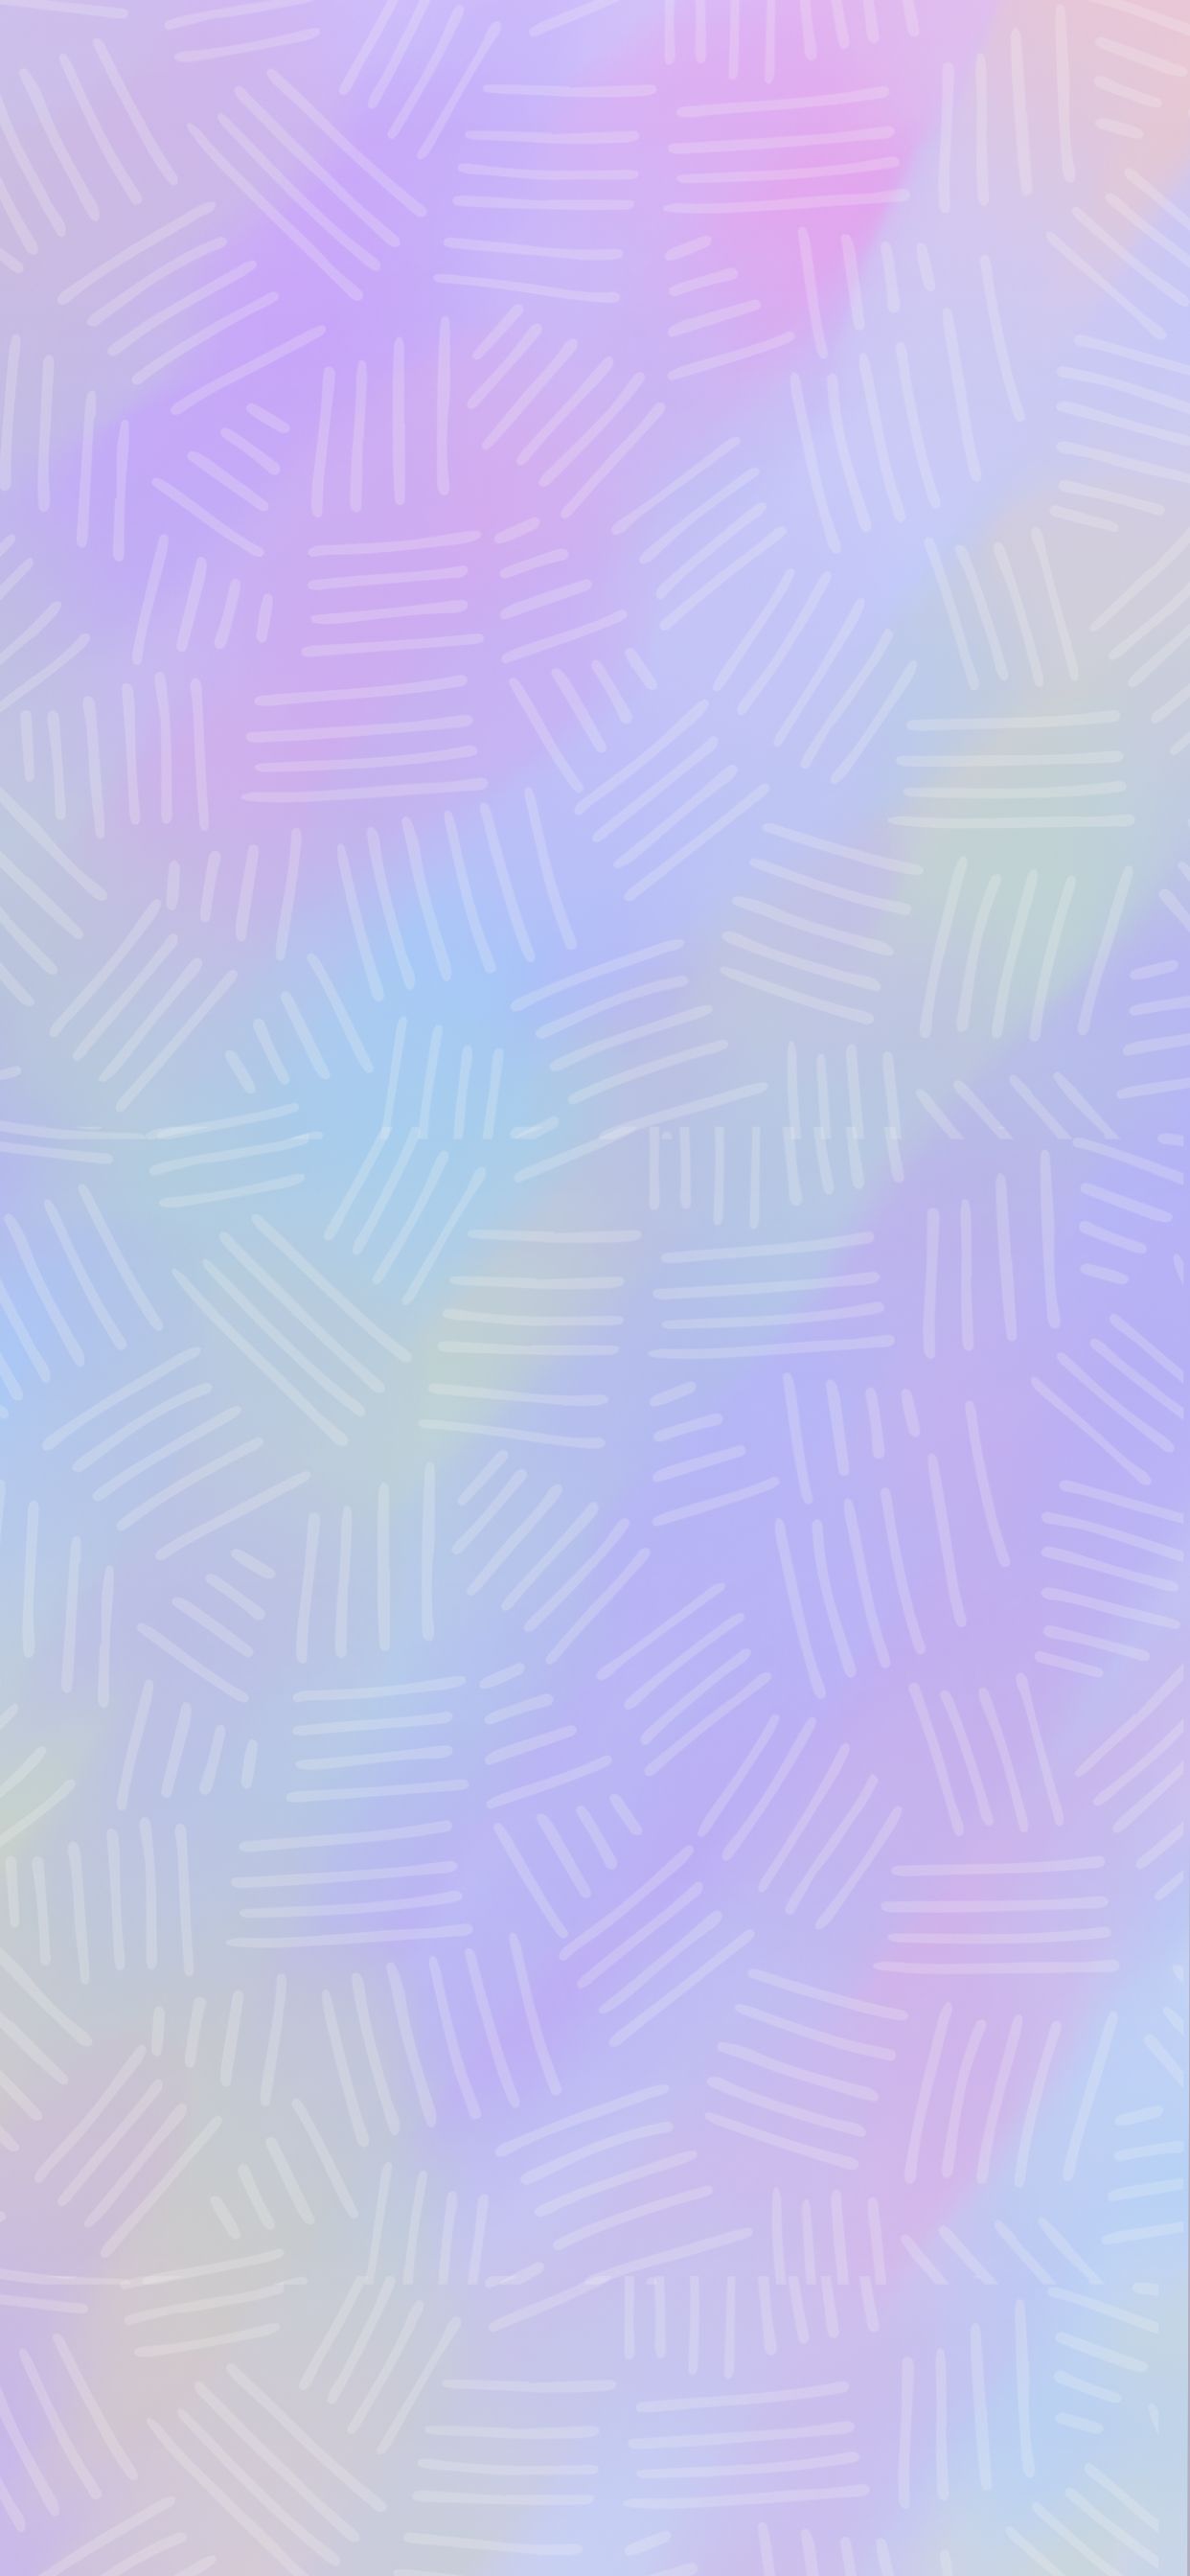 Rainbow Pastel Wallpaper. iPhone wallpaper, Pretty background for iphone, Wallpaper